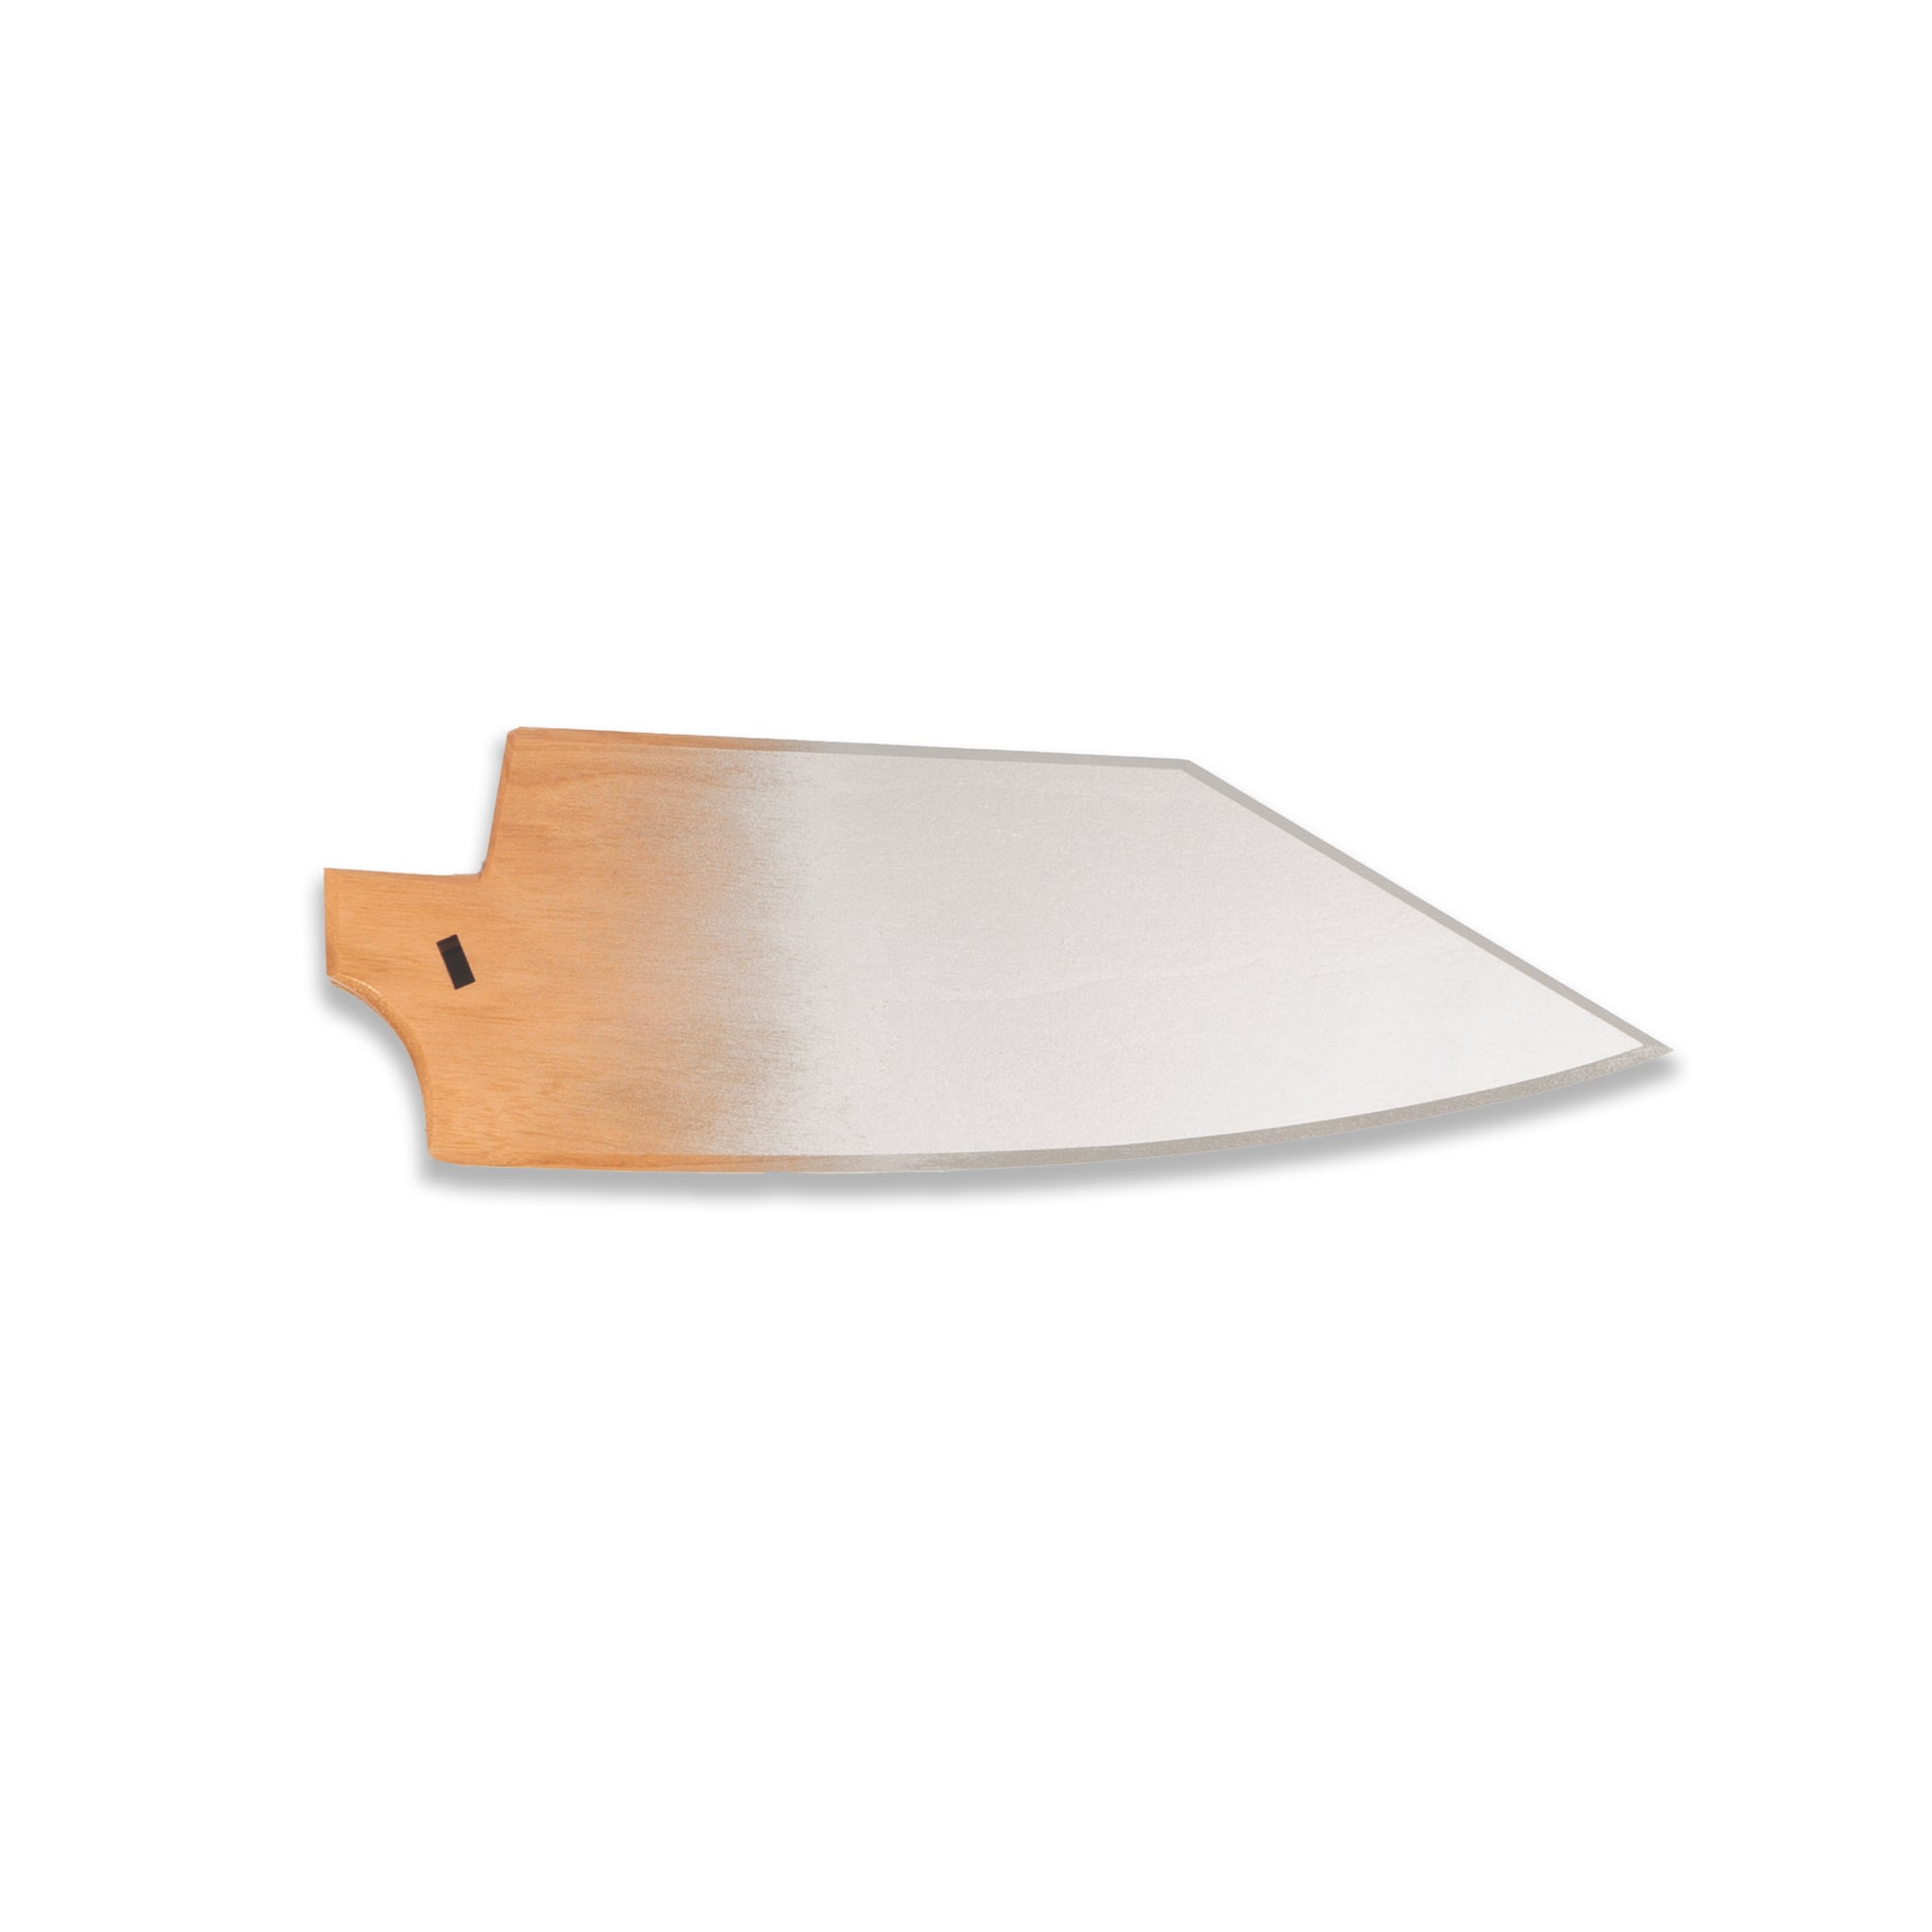 Cherry wood and silver saya knife cover for Town Cutler Ag 47 Chopper Knife.